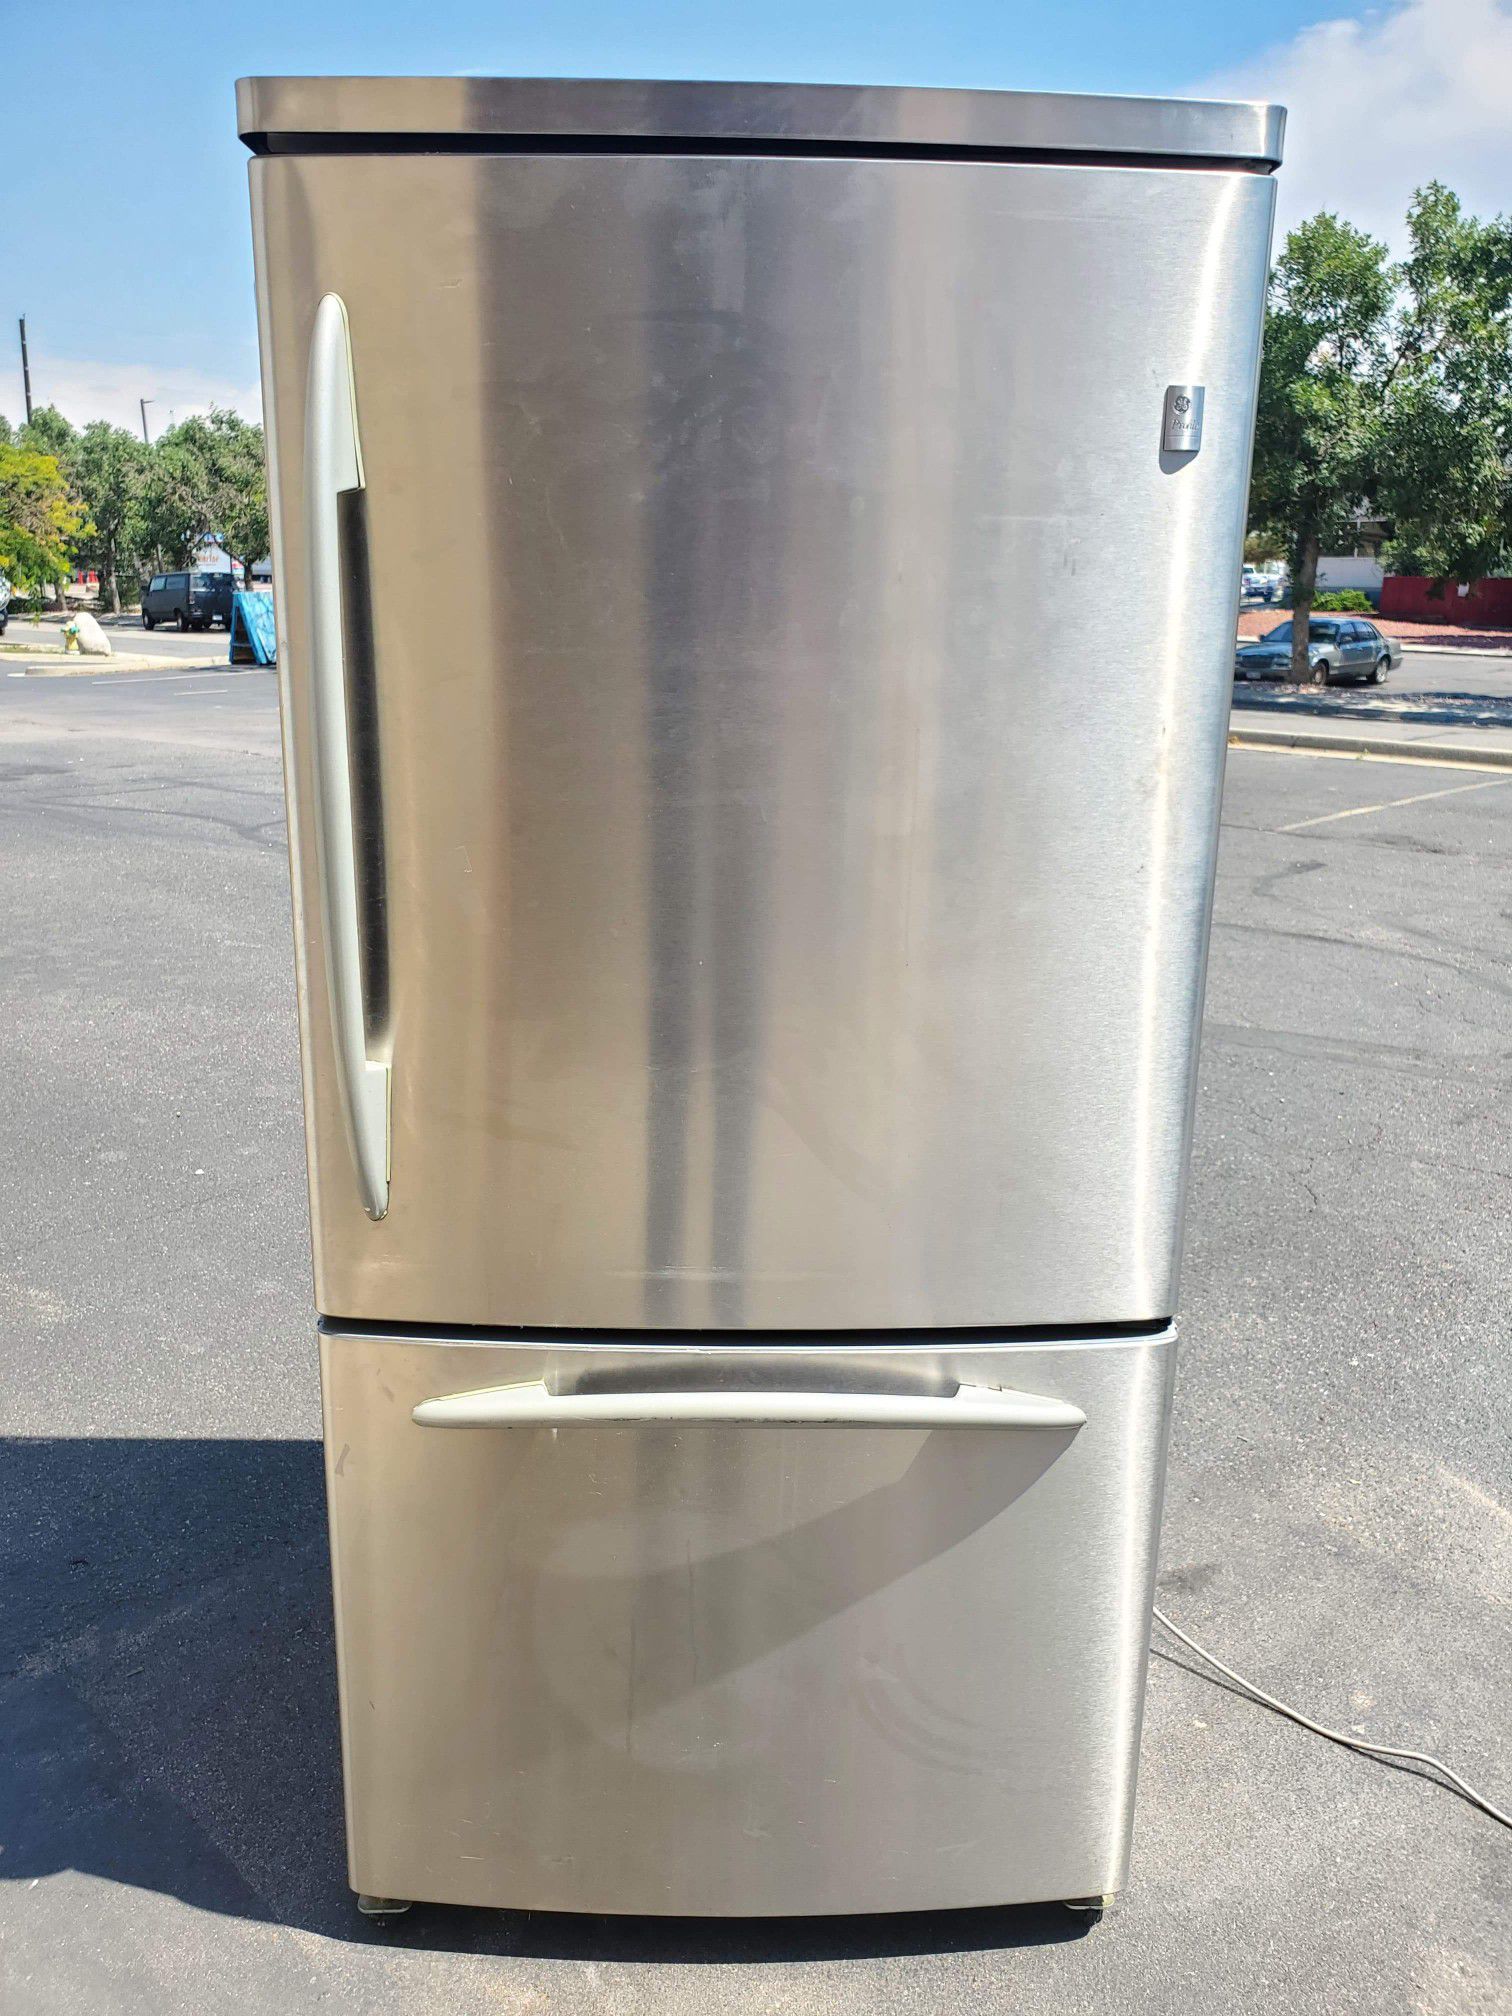 GE stainless steel fridge good working condition